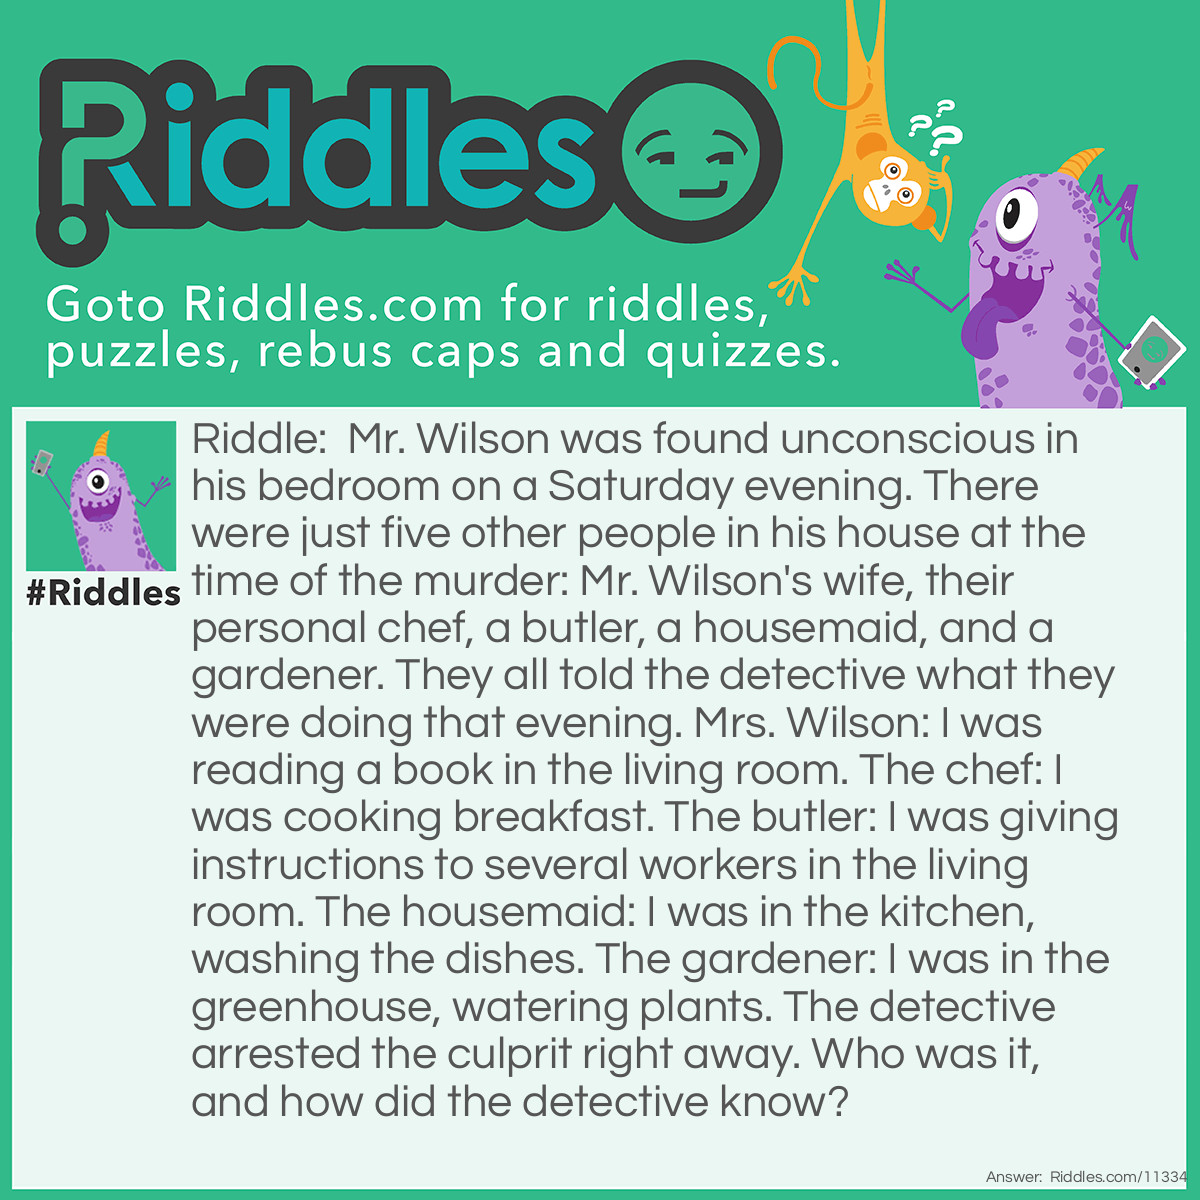 Riddle: Mr. Wilson was found unconscious in his bedroom on a Saturday evening. There were just five other people in his house at the time of the murder: Mr. Wilson's wife, their personal chef, a butler, a housemaid, and a gardener. They all told the detective what they were doing that evening. Mrs. Wilson: I was reading a book in the living room. The chef: I was cooking breakfast. The butler: I was giving instructions to several workers in the living room. The housemaid: I was in the kitchen, washing the dishes. The gardener: I was in the greenhouse, watering plants. The detective arrested the culprit right away. Who was it, and how did the detective know? Answer: In fact, there wasn't just one culprit–there were TWO culprits: the personal chef and the butler. The personal chef is the first culprit; the murder happened in the EVENING. He couldn't be cooking breakfast so late in the day. The butler is the second culprit; there were only 5 other people in the house, including himself, and almost none of them were in the living room, except for the wife (but she is not a WORKER). He couldn't be supervising so many workers.